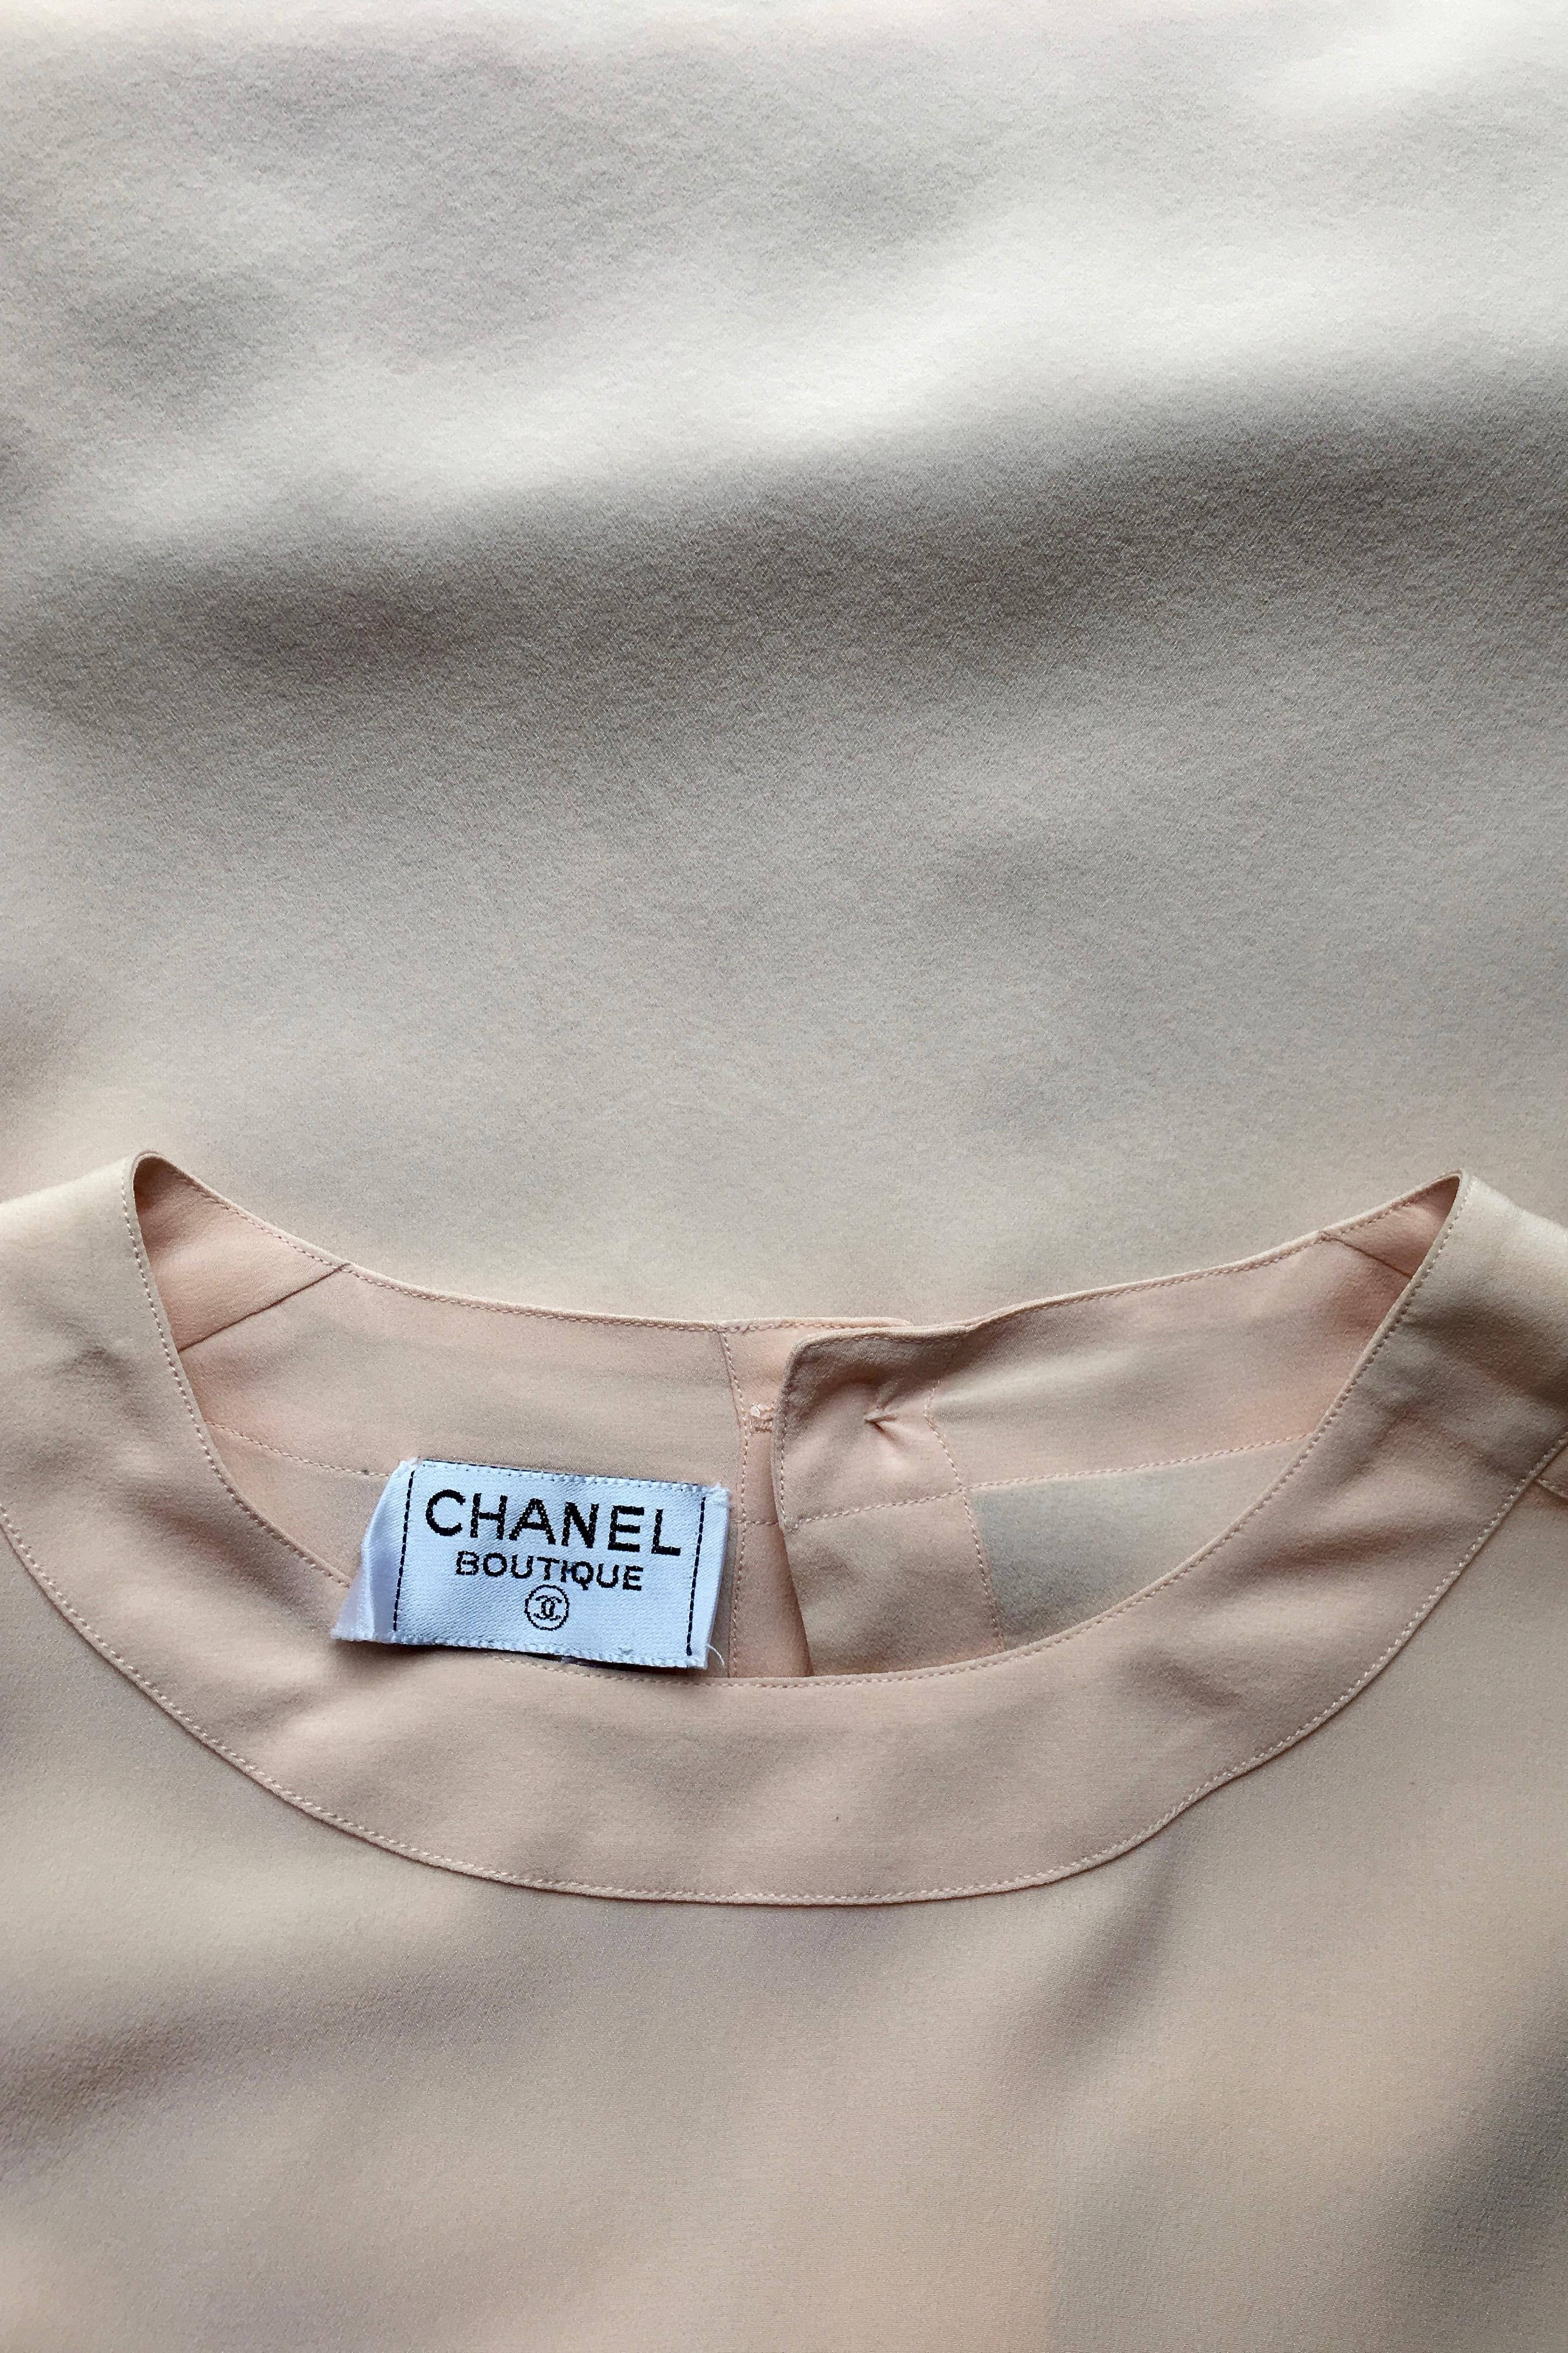 A classic 1980s Chanel baby pink colored silk blouse with short sleeves, a round neckline and patch pockets situated on both sides of the bust. The boxy fit gives a relaxed feel while the gold button closures of both pockets gives an elegant edge.